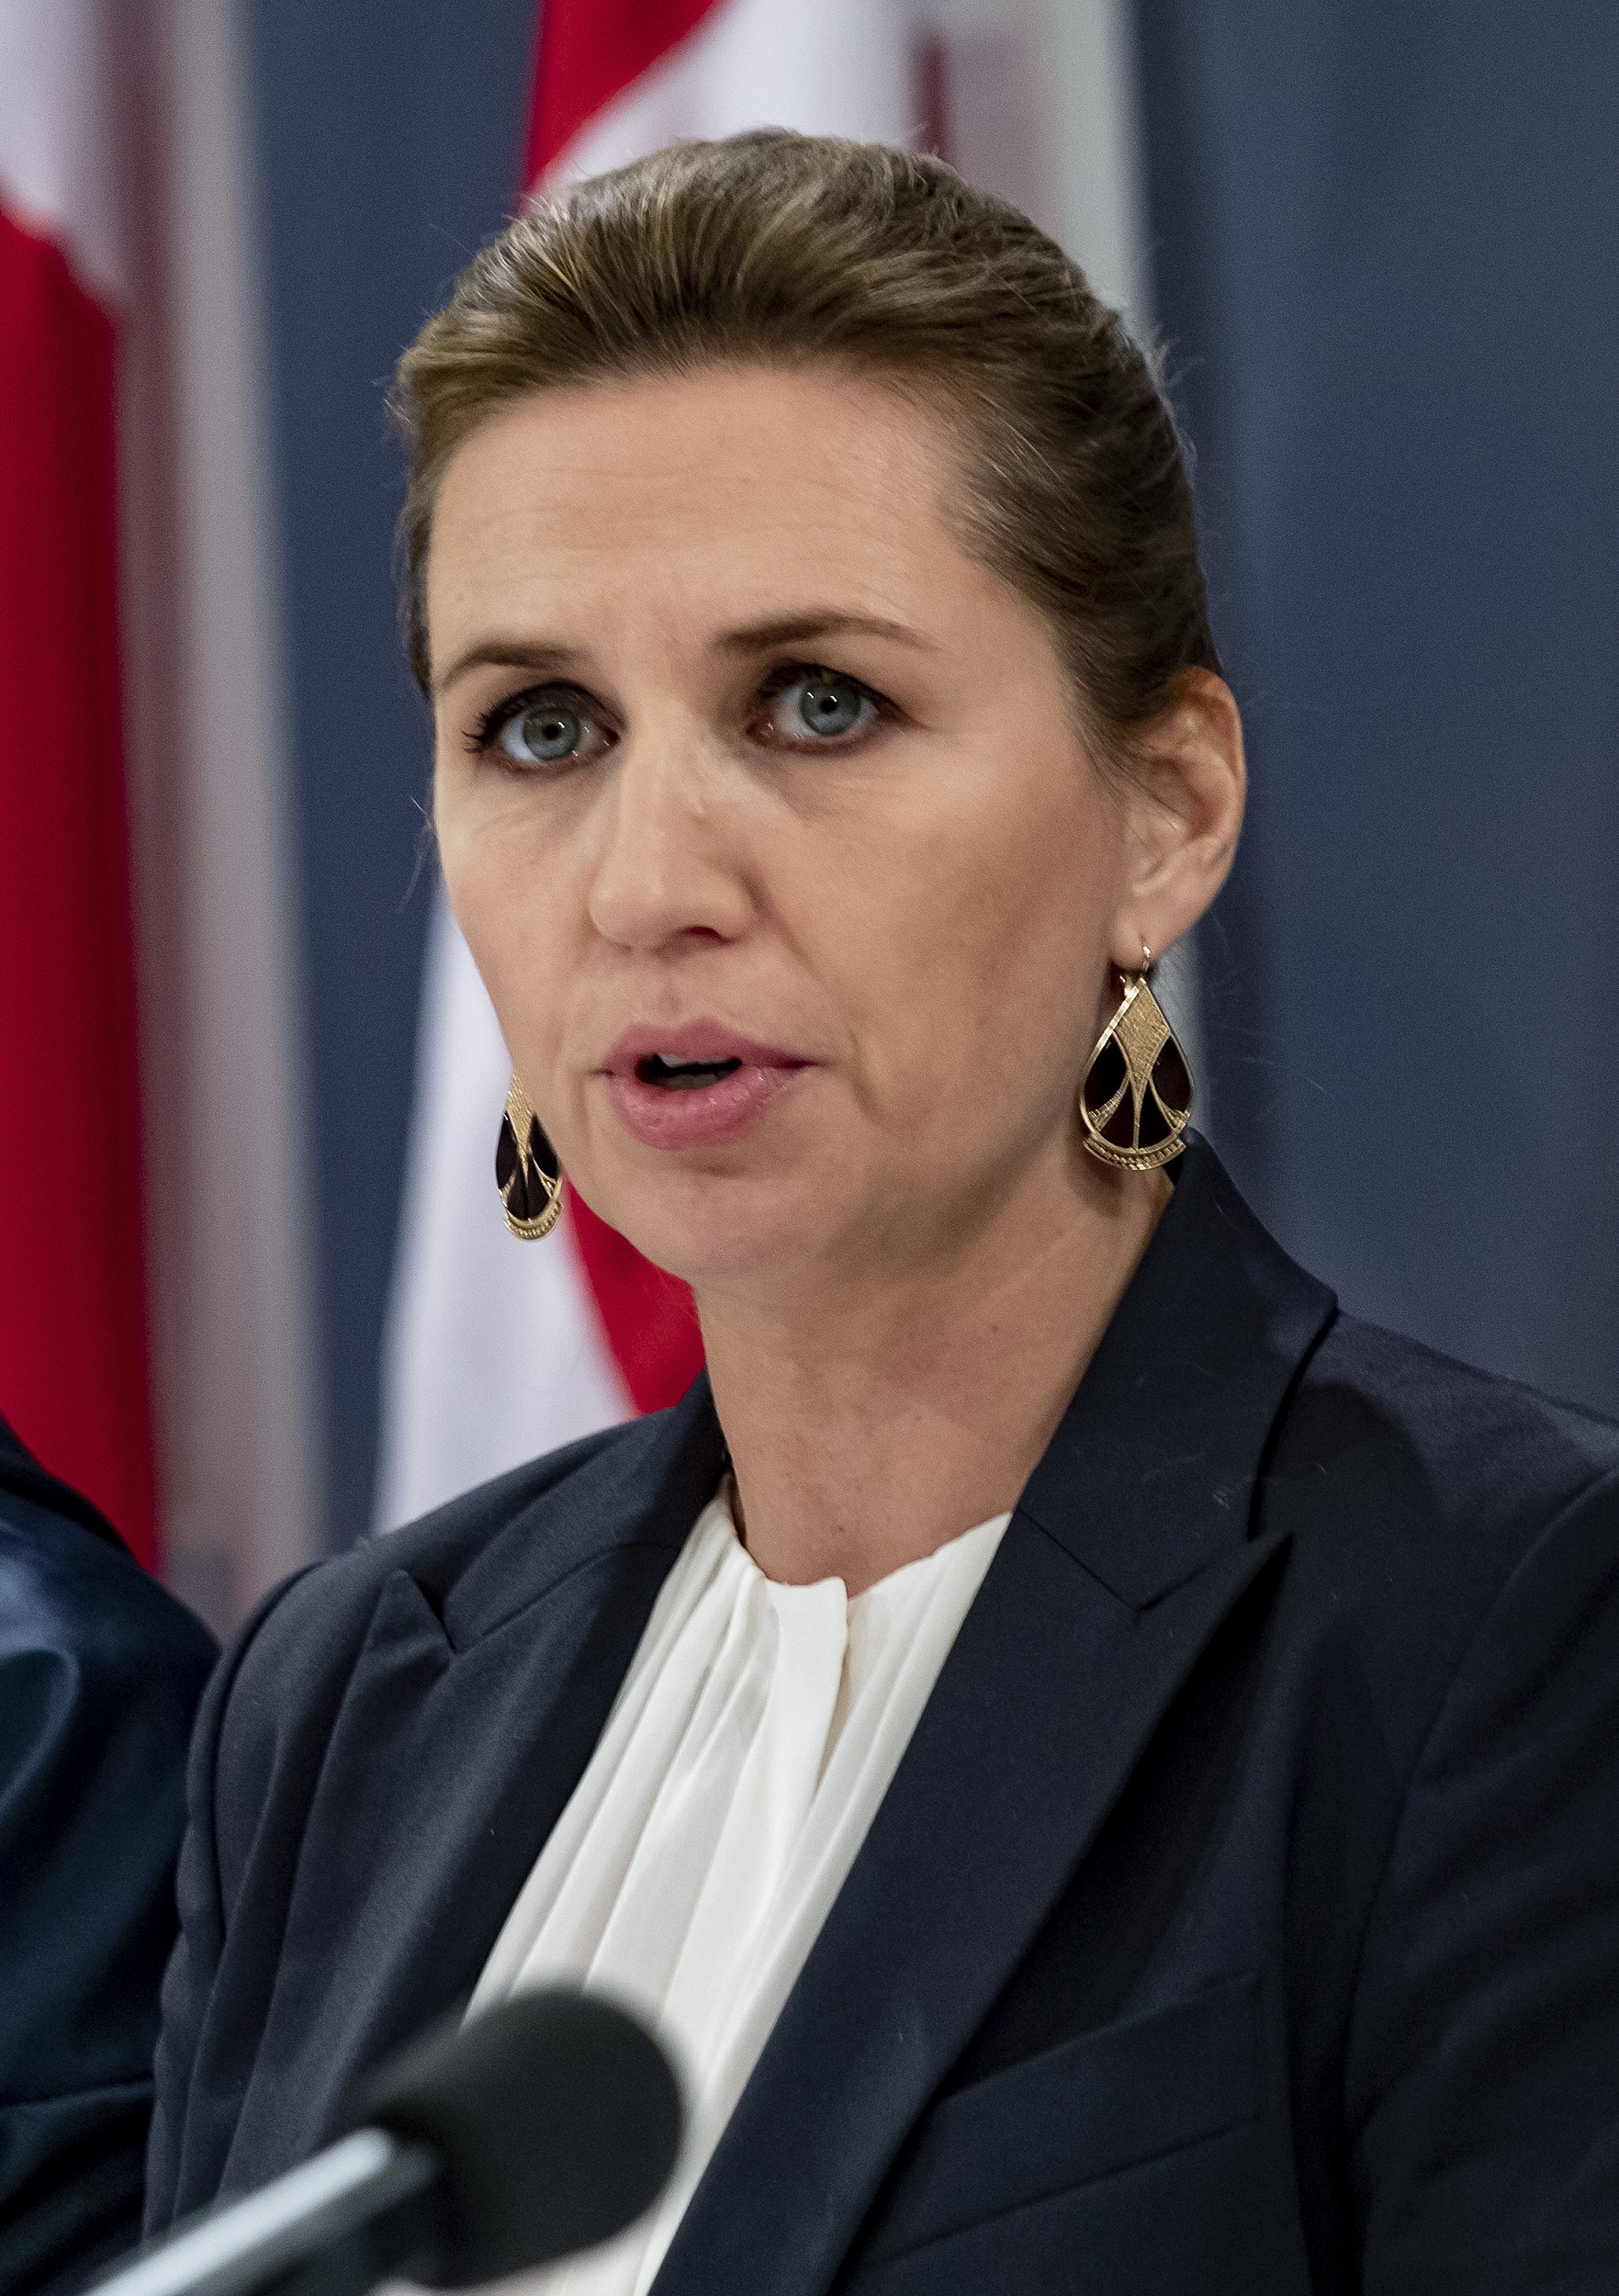 'Borgen' character drew inspiration from Danish PM